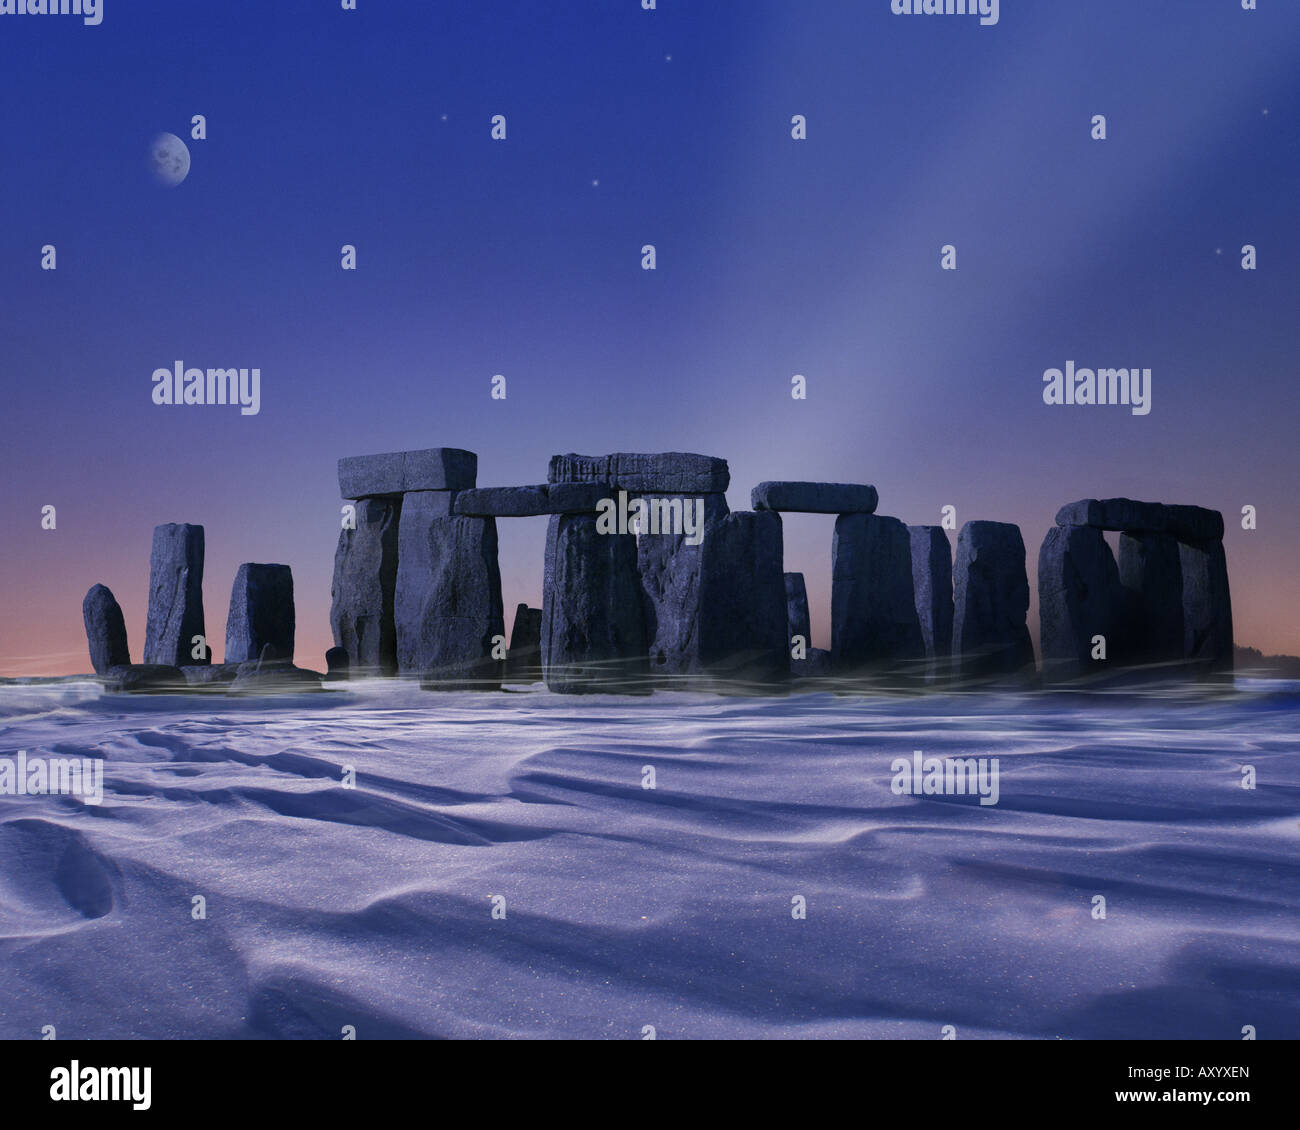 GB - WILTSHIRE: Christmas at the Standing Stones of Stonehenge Stock Photo